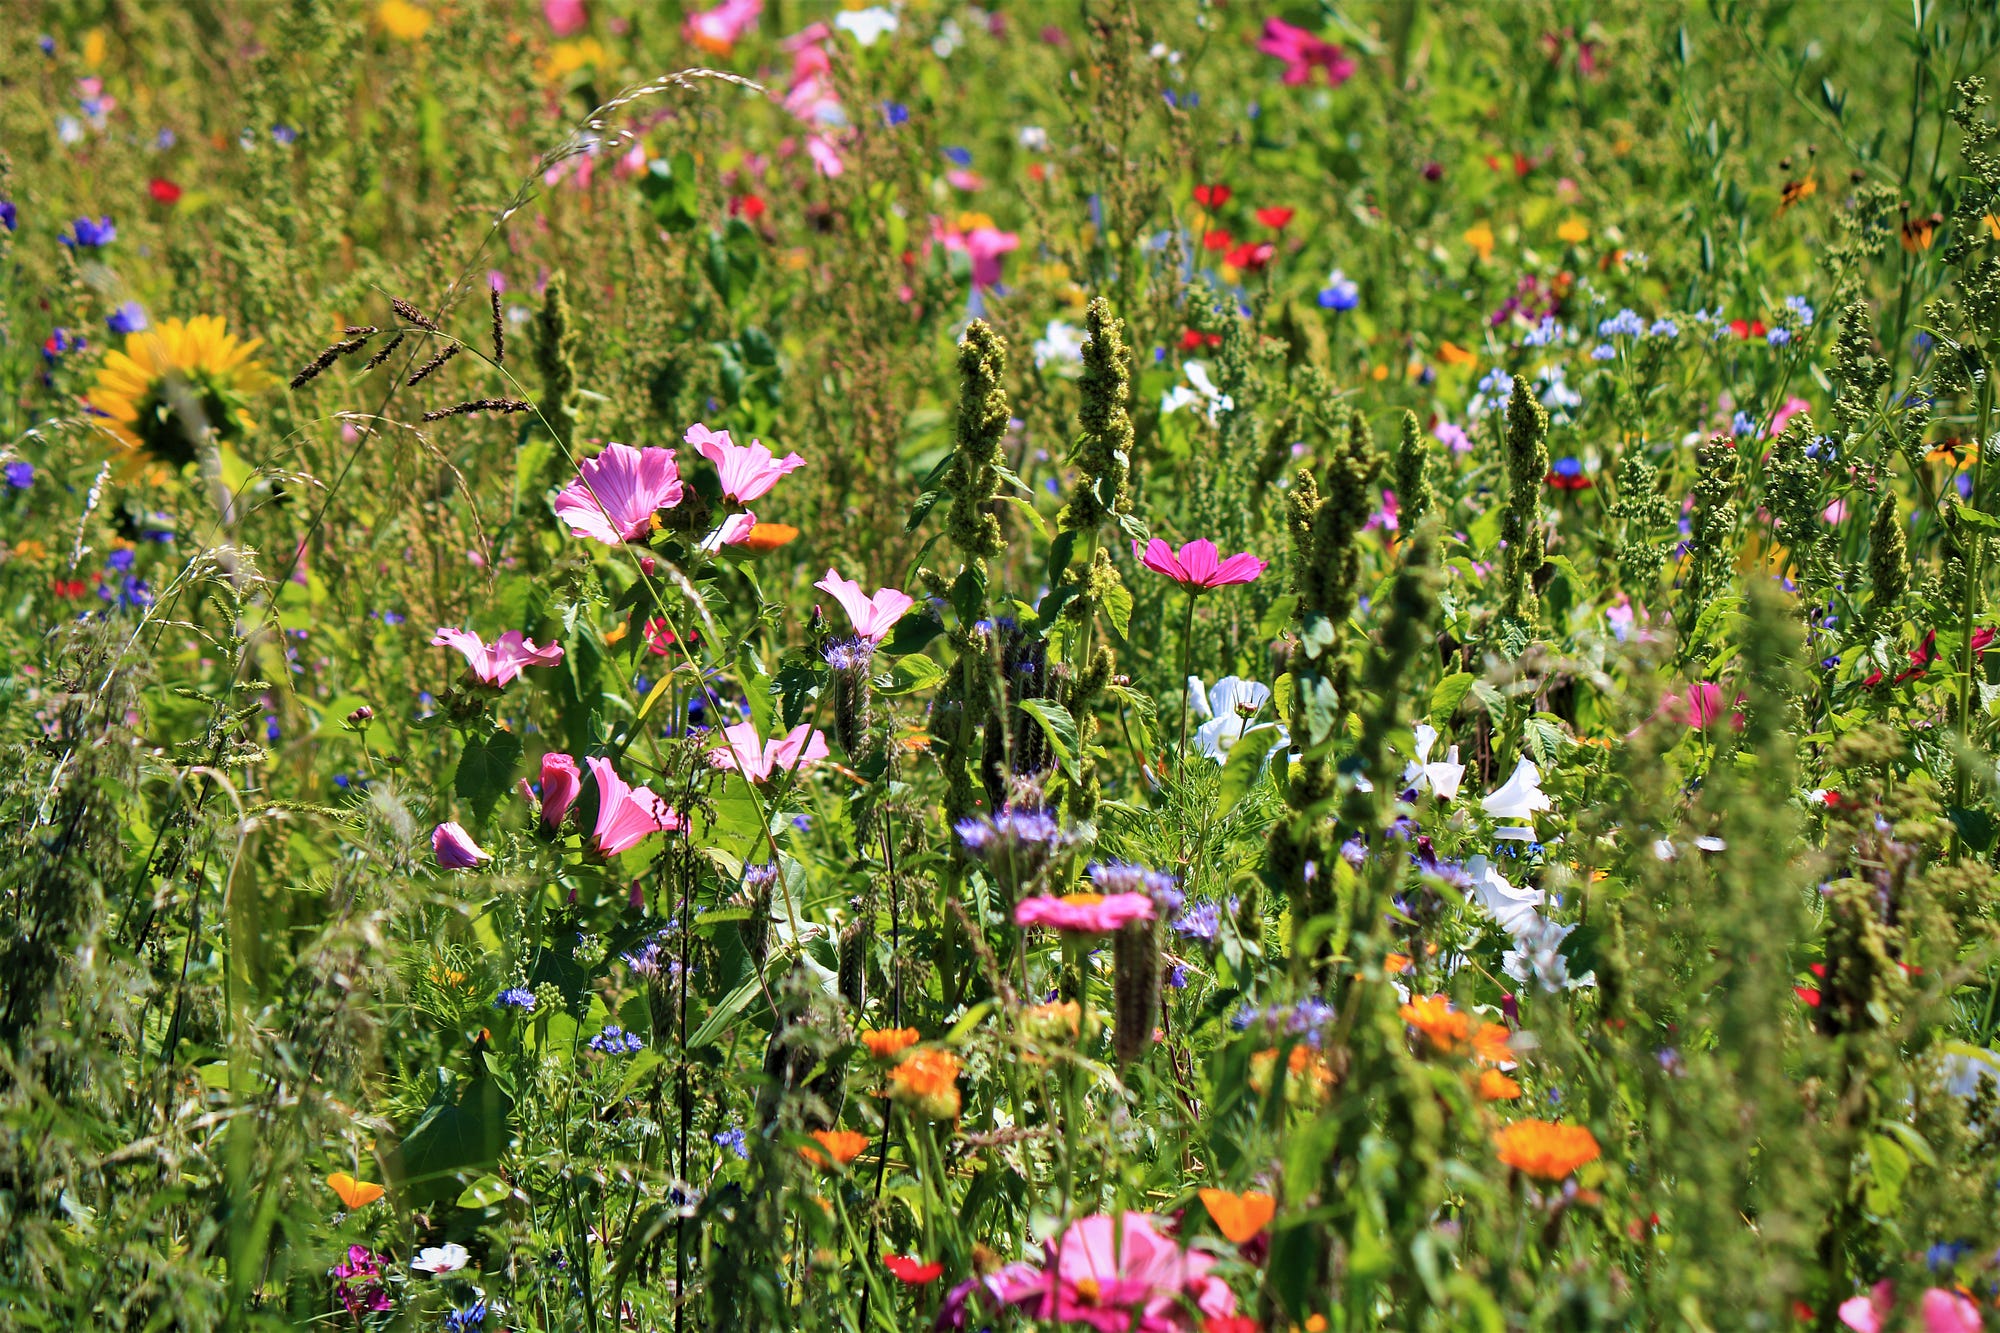 The Beauty of Wildflowers. A field of flowers filled with life, by Anne  Bonfert, Weeds & Wildflowers